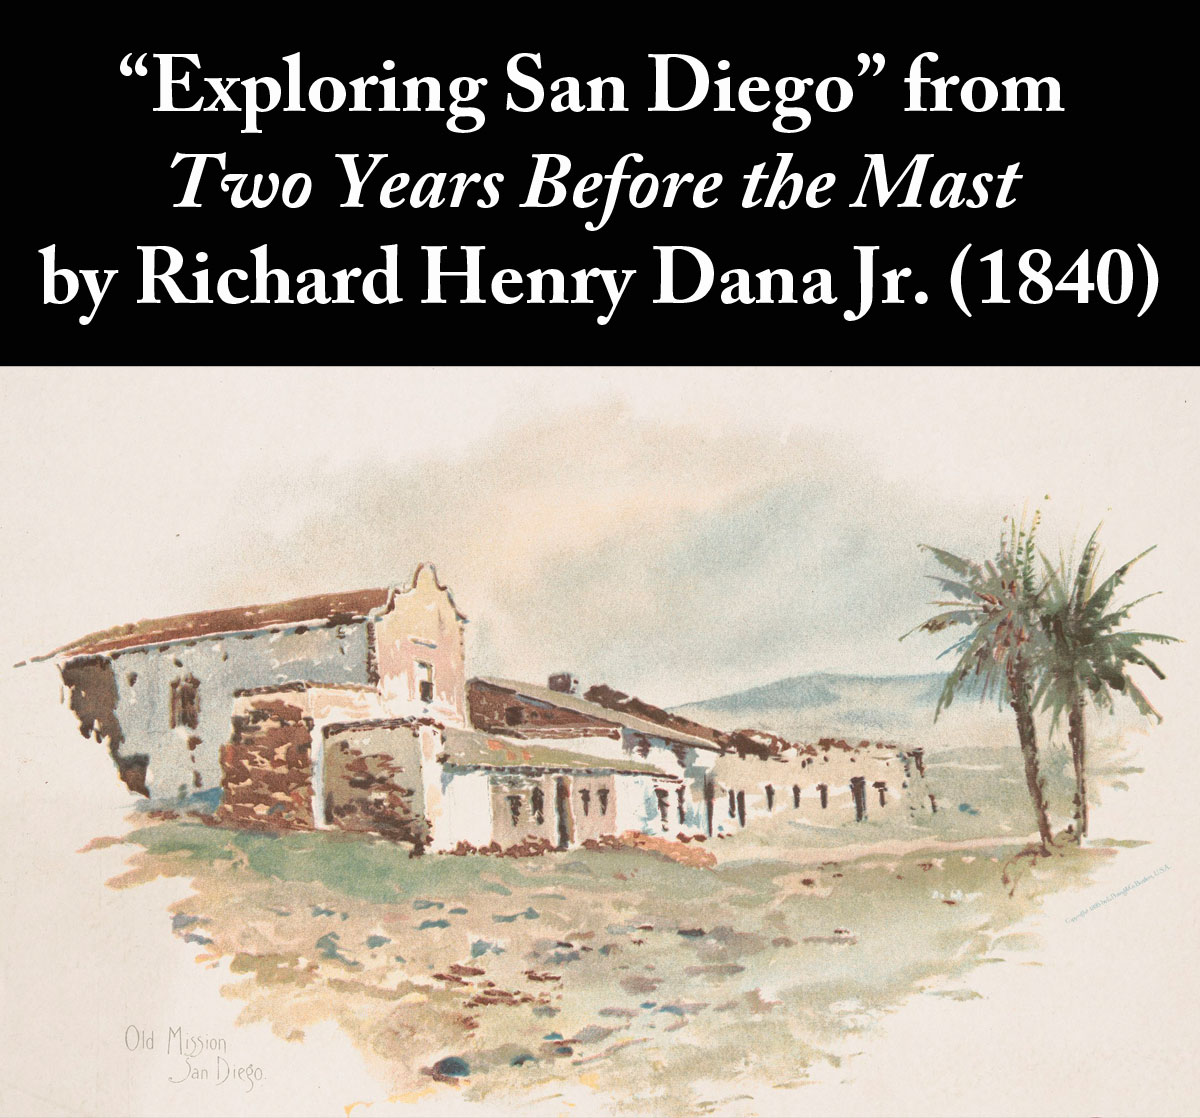 Exploring San Diego from Two Years Before the Mast by Richard Henry Dana Jr. (1840)